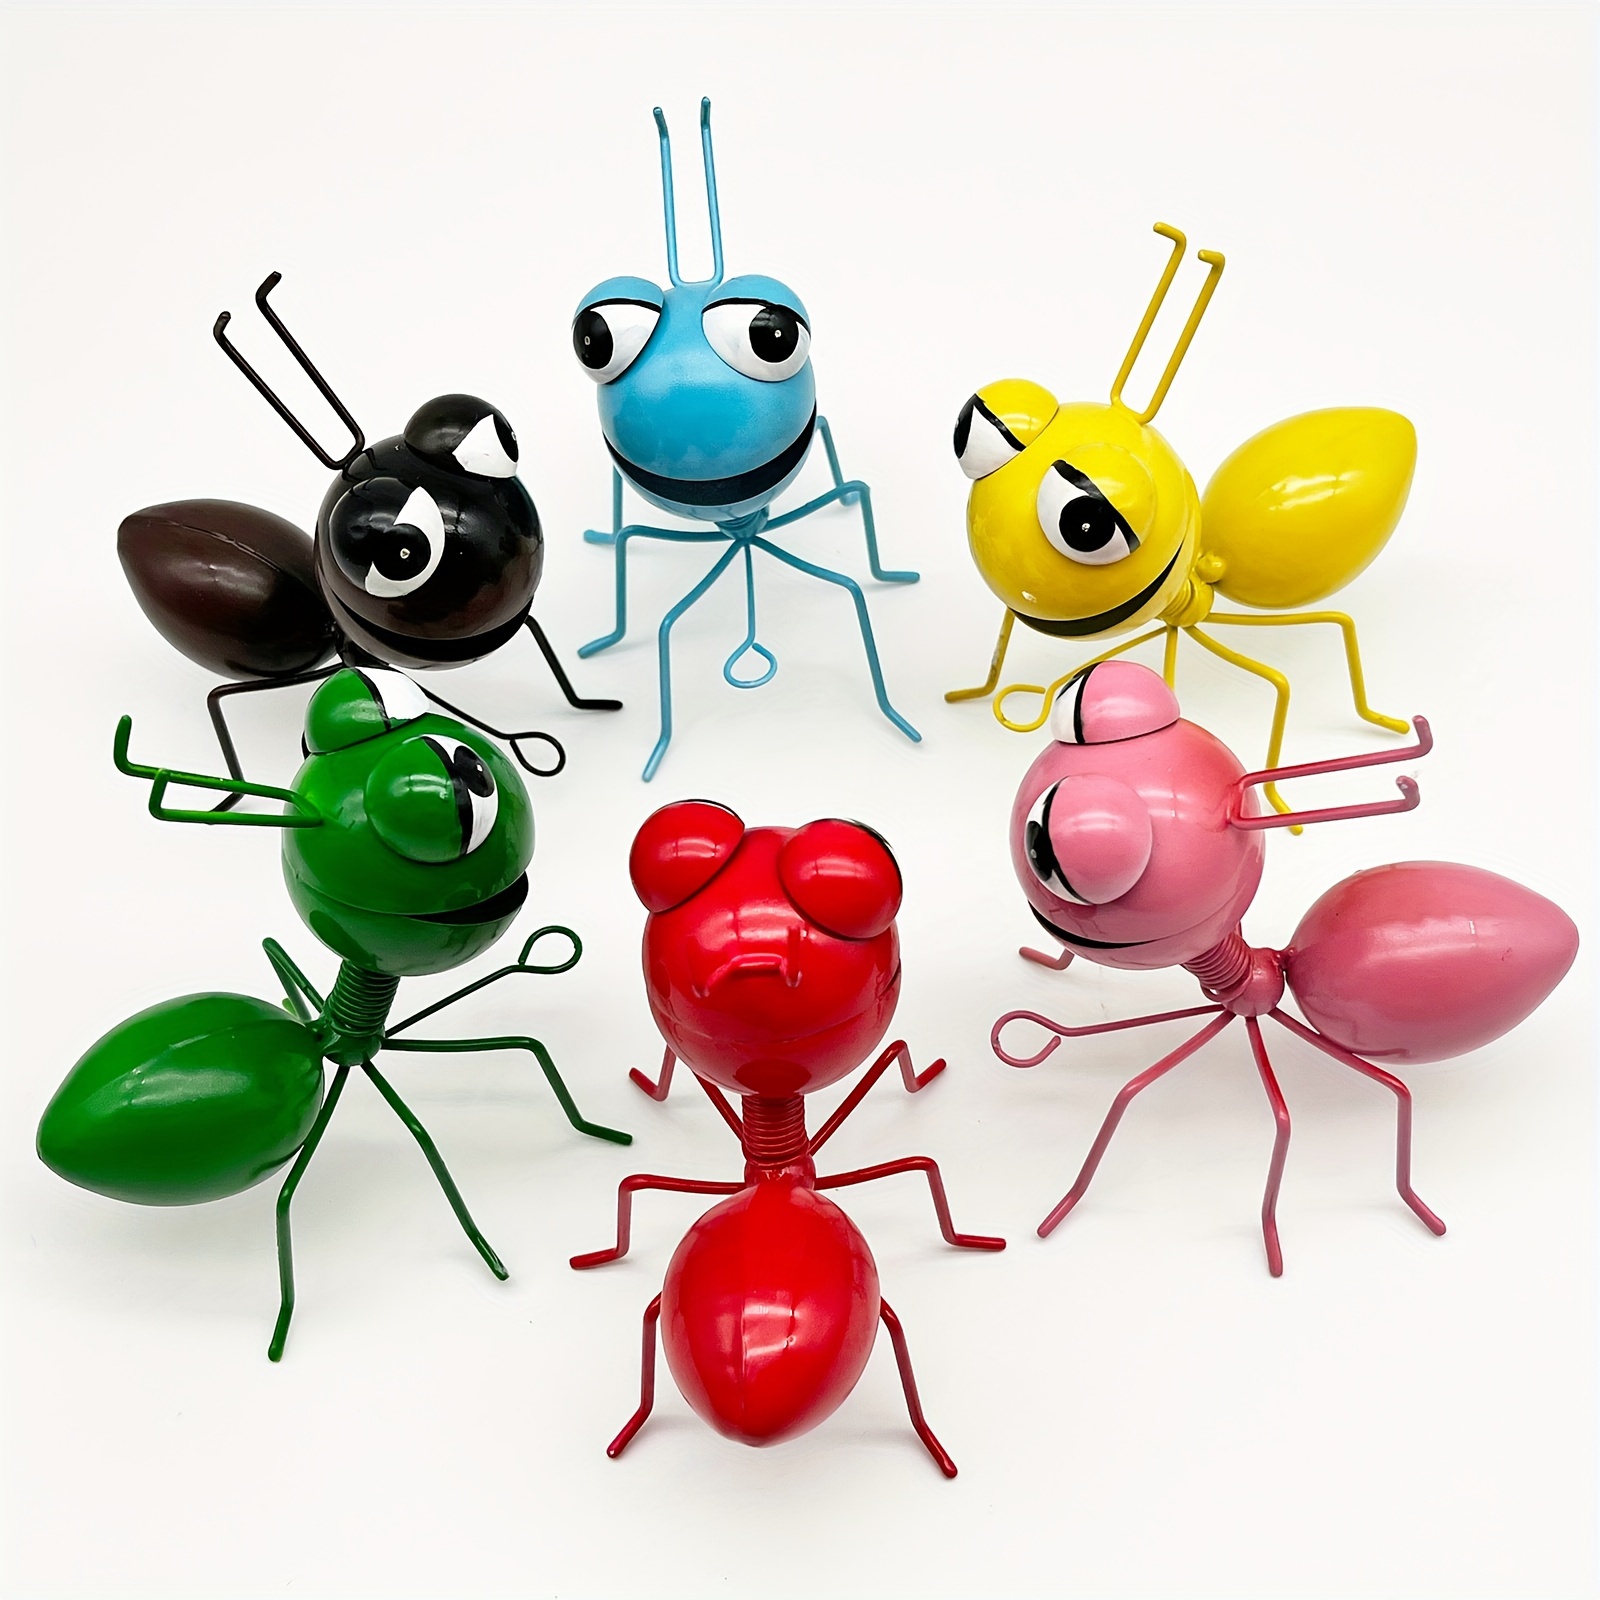 

6-piece Set Of Colorful Metal Ant Wall Art Decorations For Garden And Home - Outdoor/indoor Cartoon Ant Craft Plaques